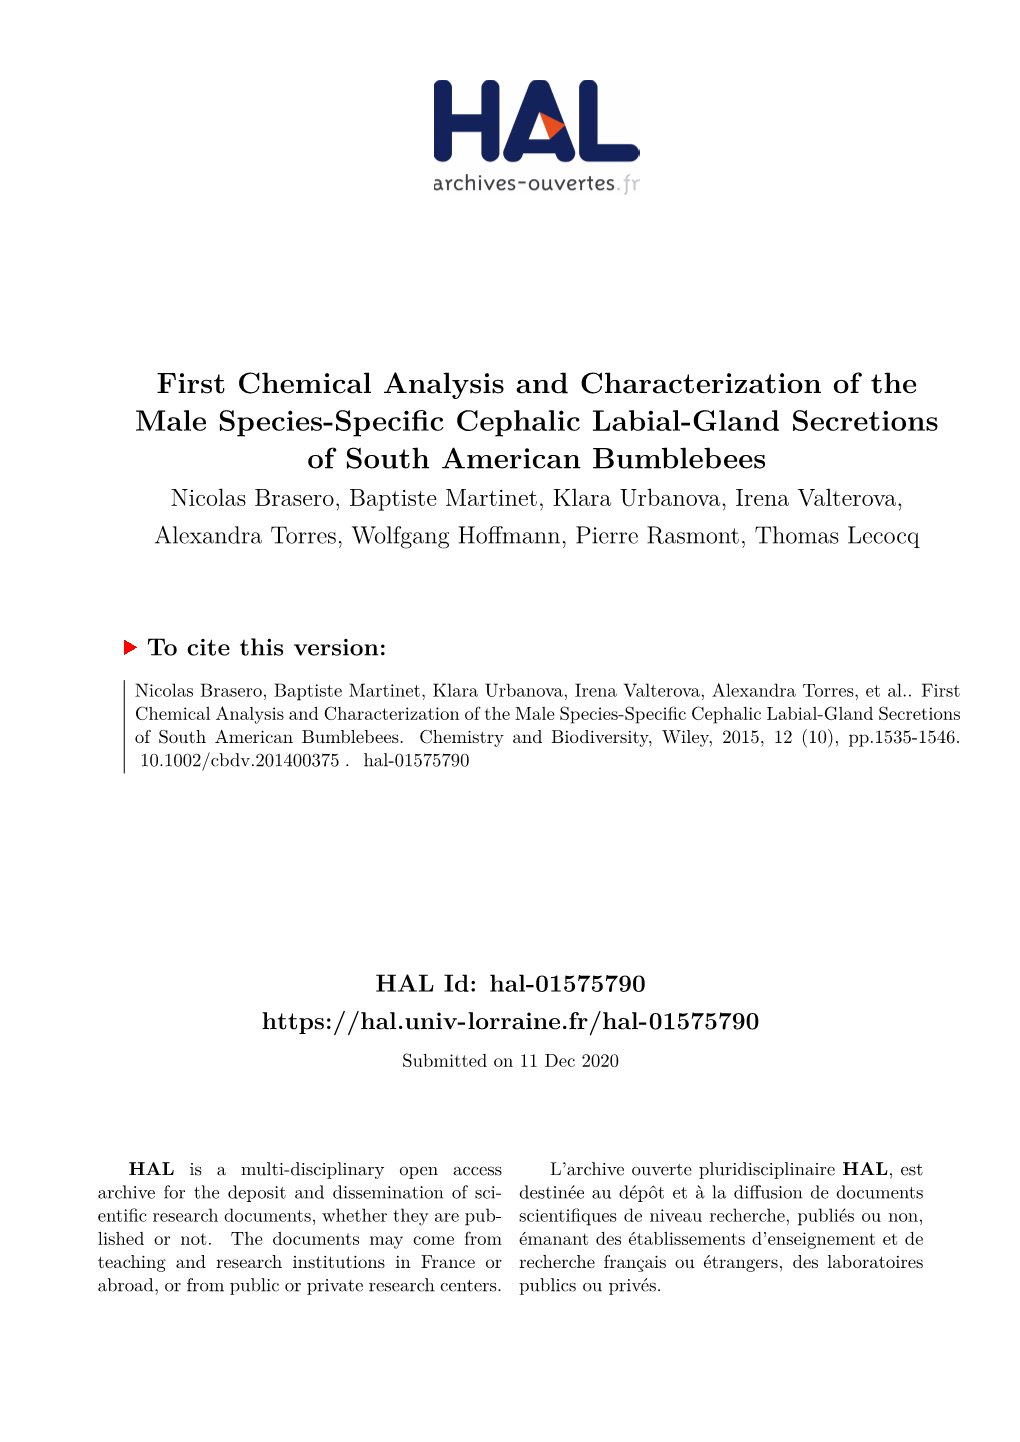 First Chemical Analysis and Characterization of the Male